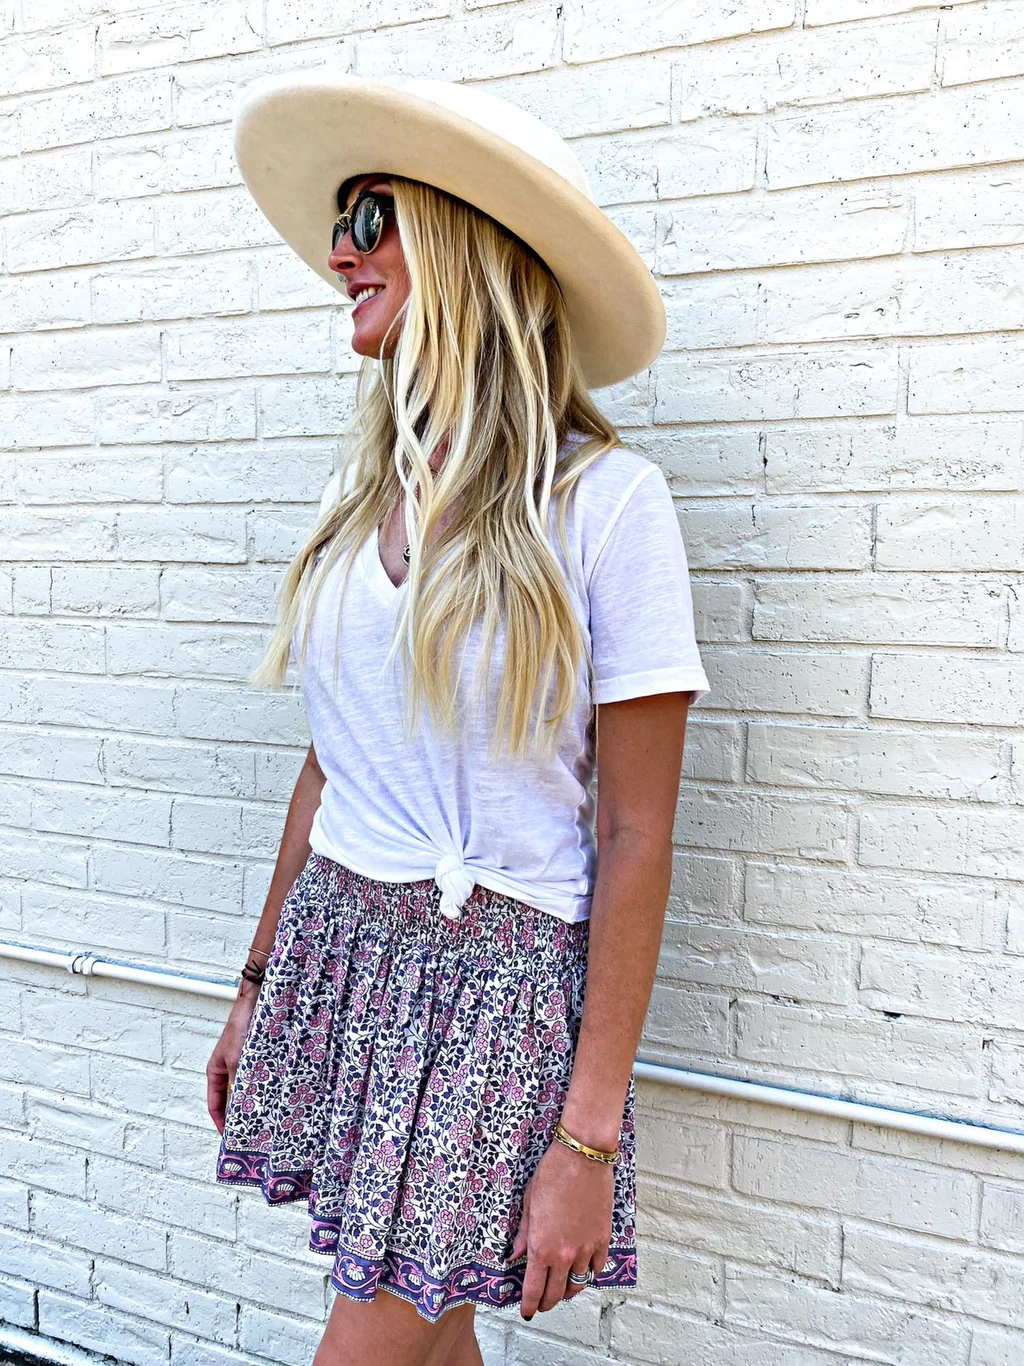 Cowboy hat, white ruched blouse, pink miniskirt